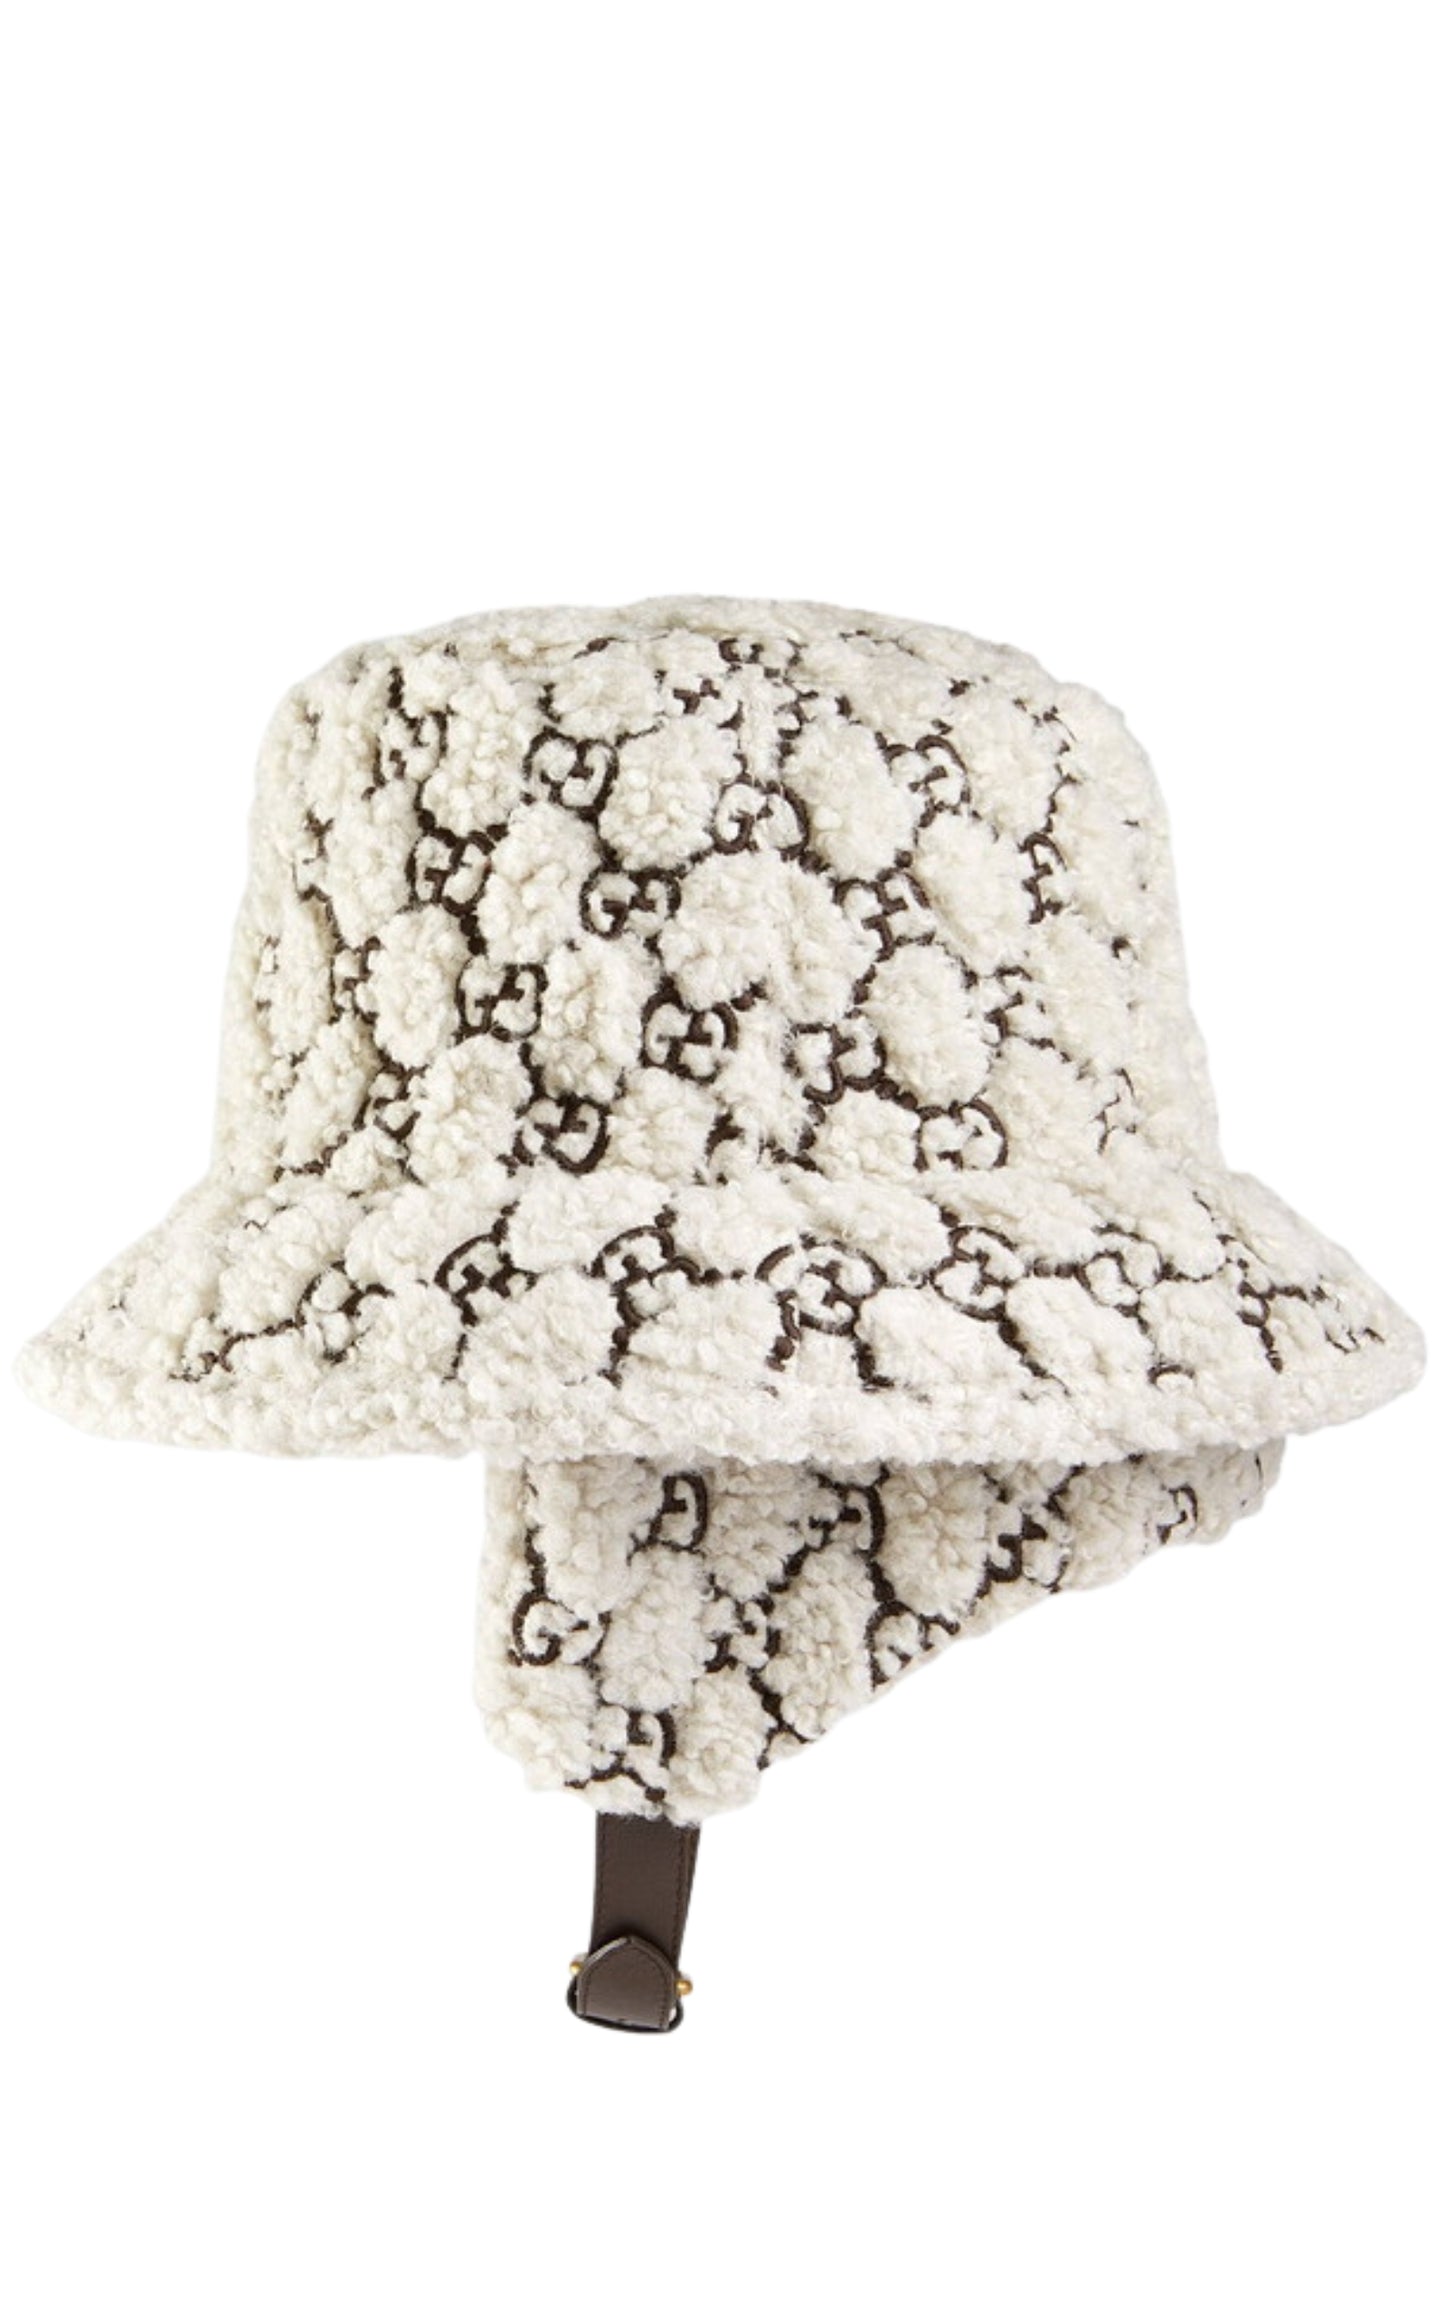  GucciCurly Gg Eco Fur Hat With Ear Flaps - Runway Catalog